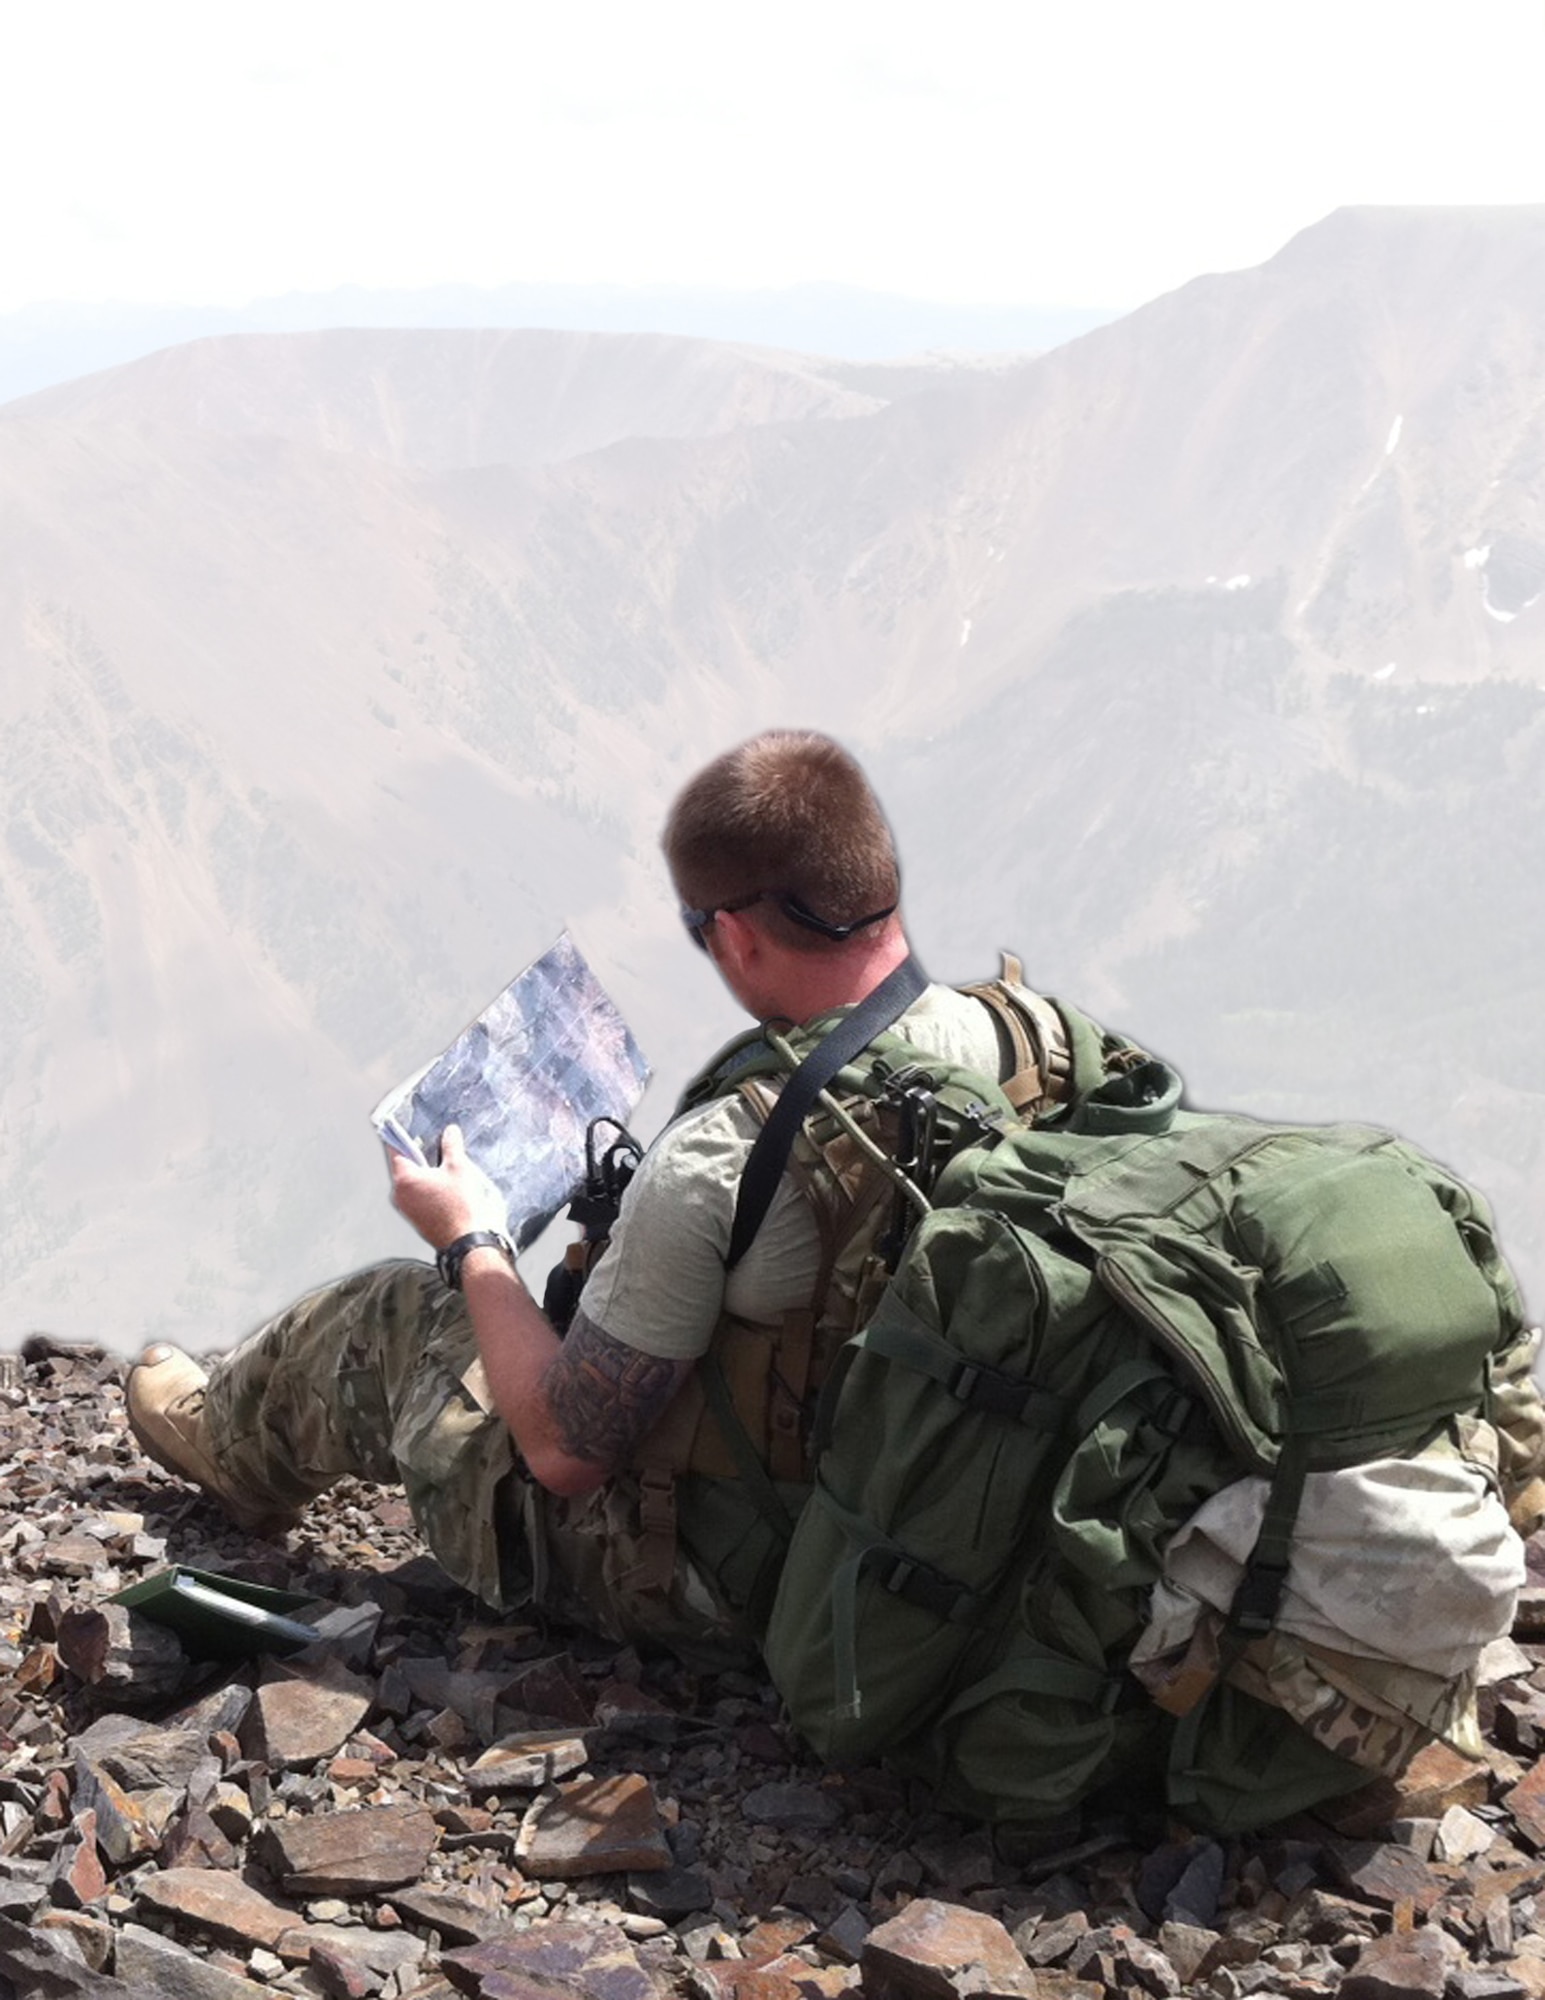 Master Sgt. Anthony Hobson, 113th Air Support Operation Squadron, utilizes detailed satellite imagery to plan a route through extremely aggressive terrain during a high altitude patrol in Butte, Mont.  Photo provided by 113th ASOS